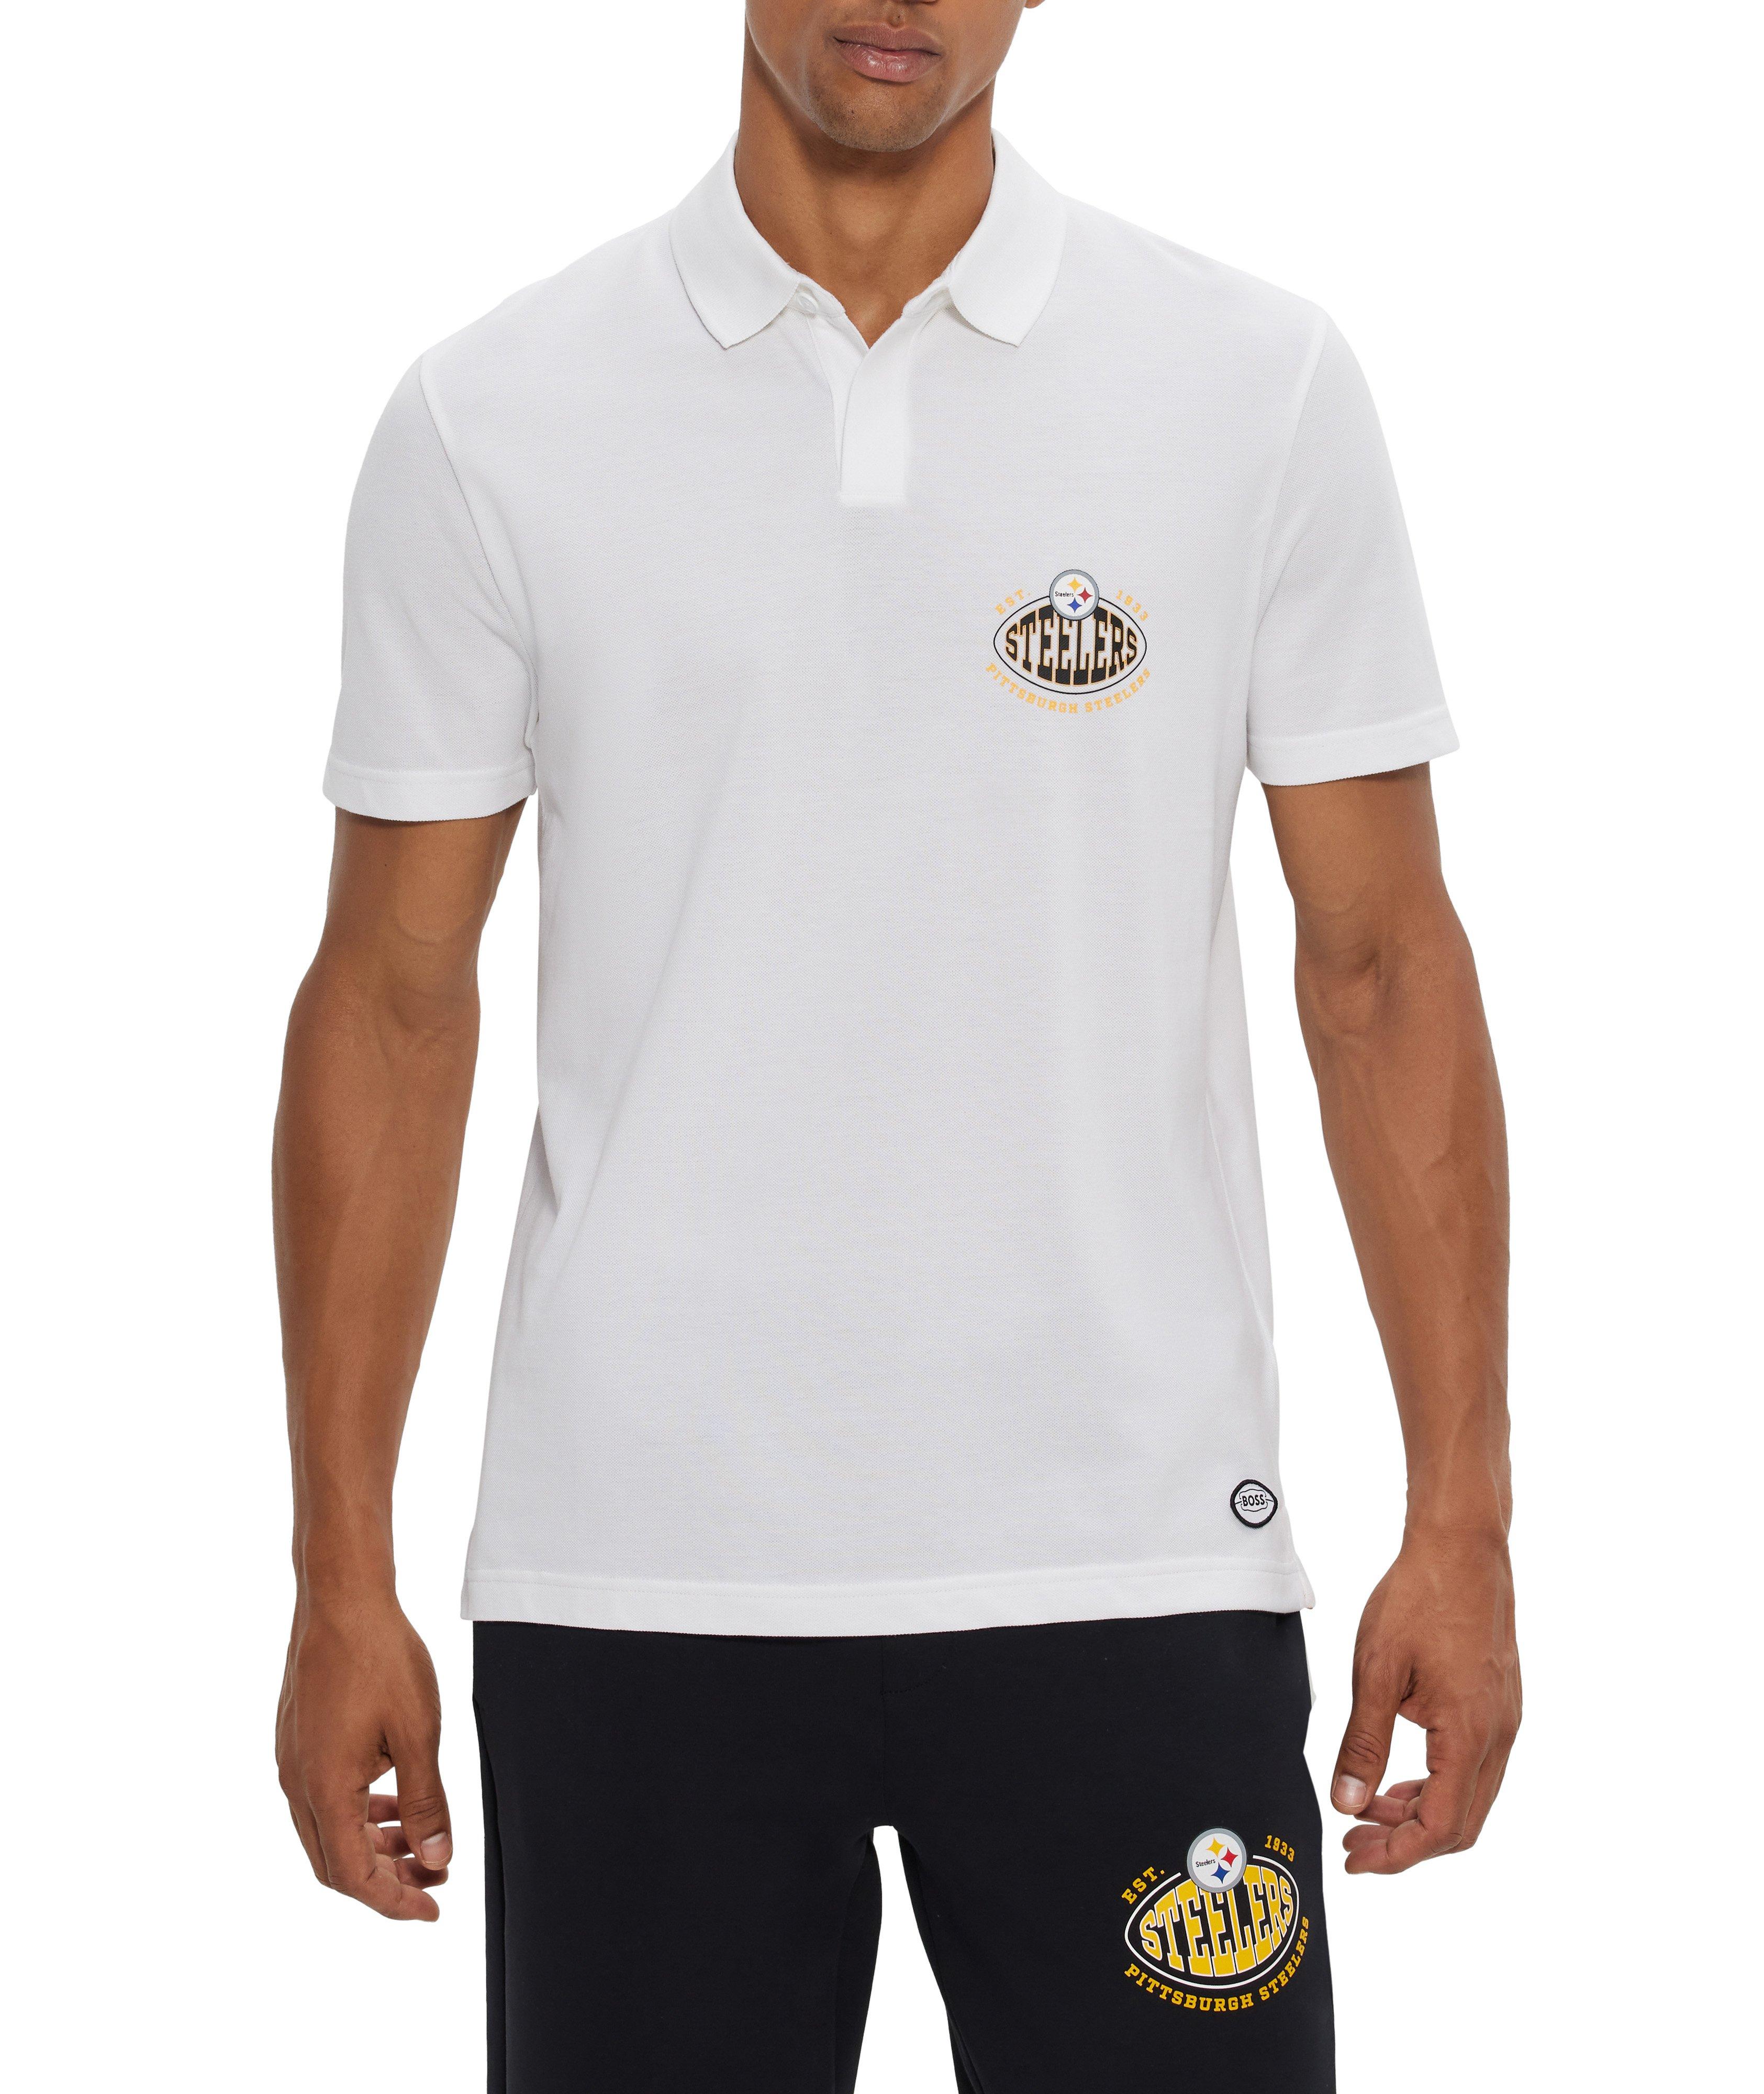 NFL Collection Pittsburgh Steelers Polo image 1